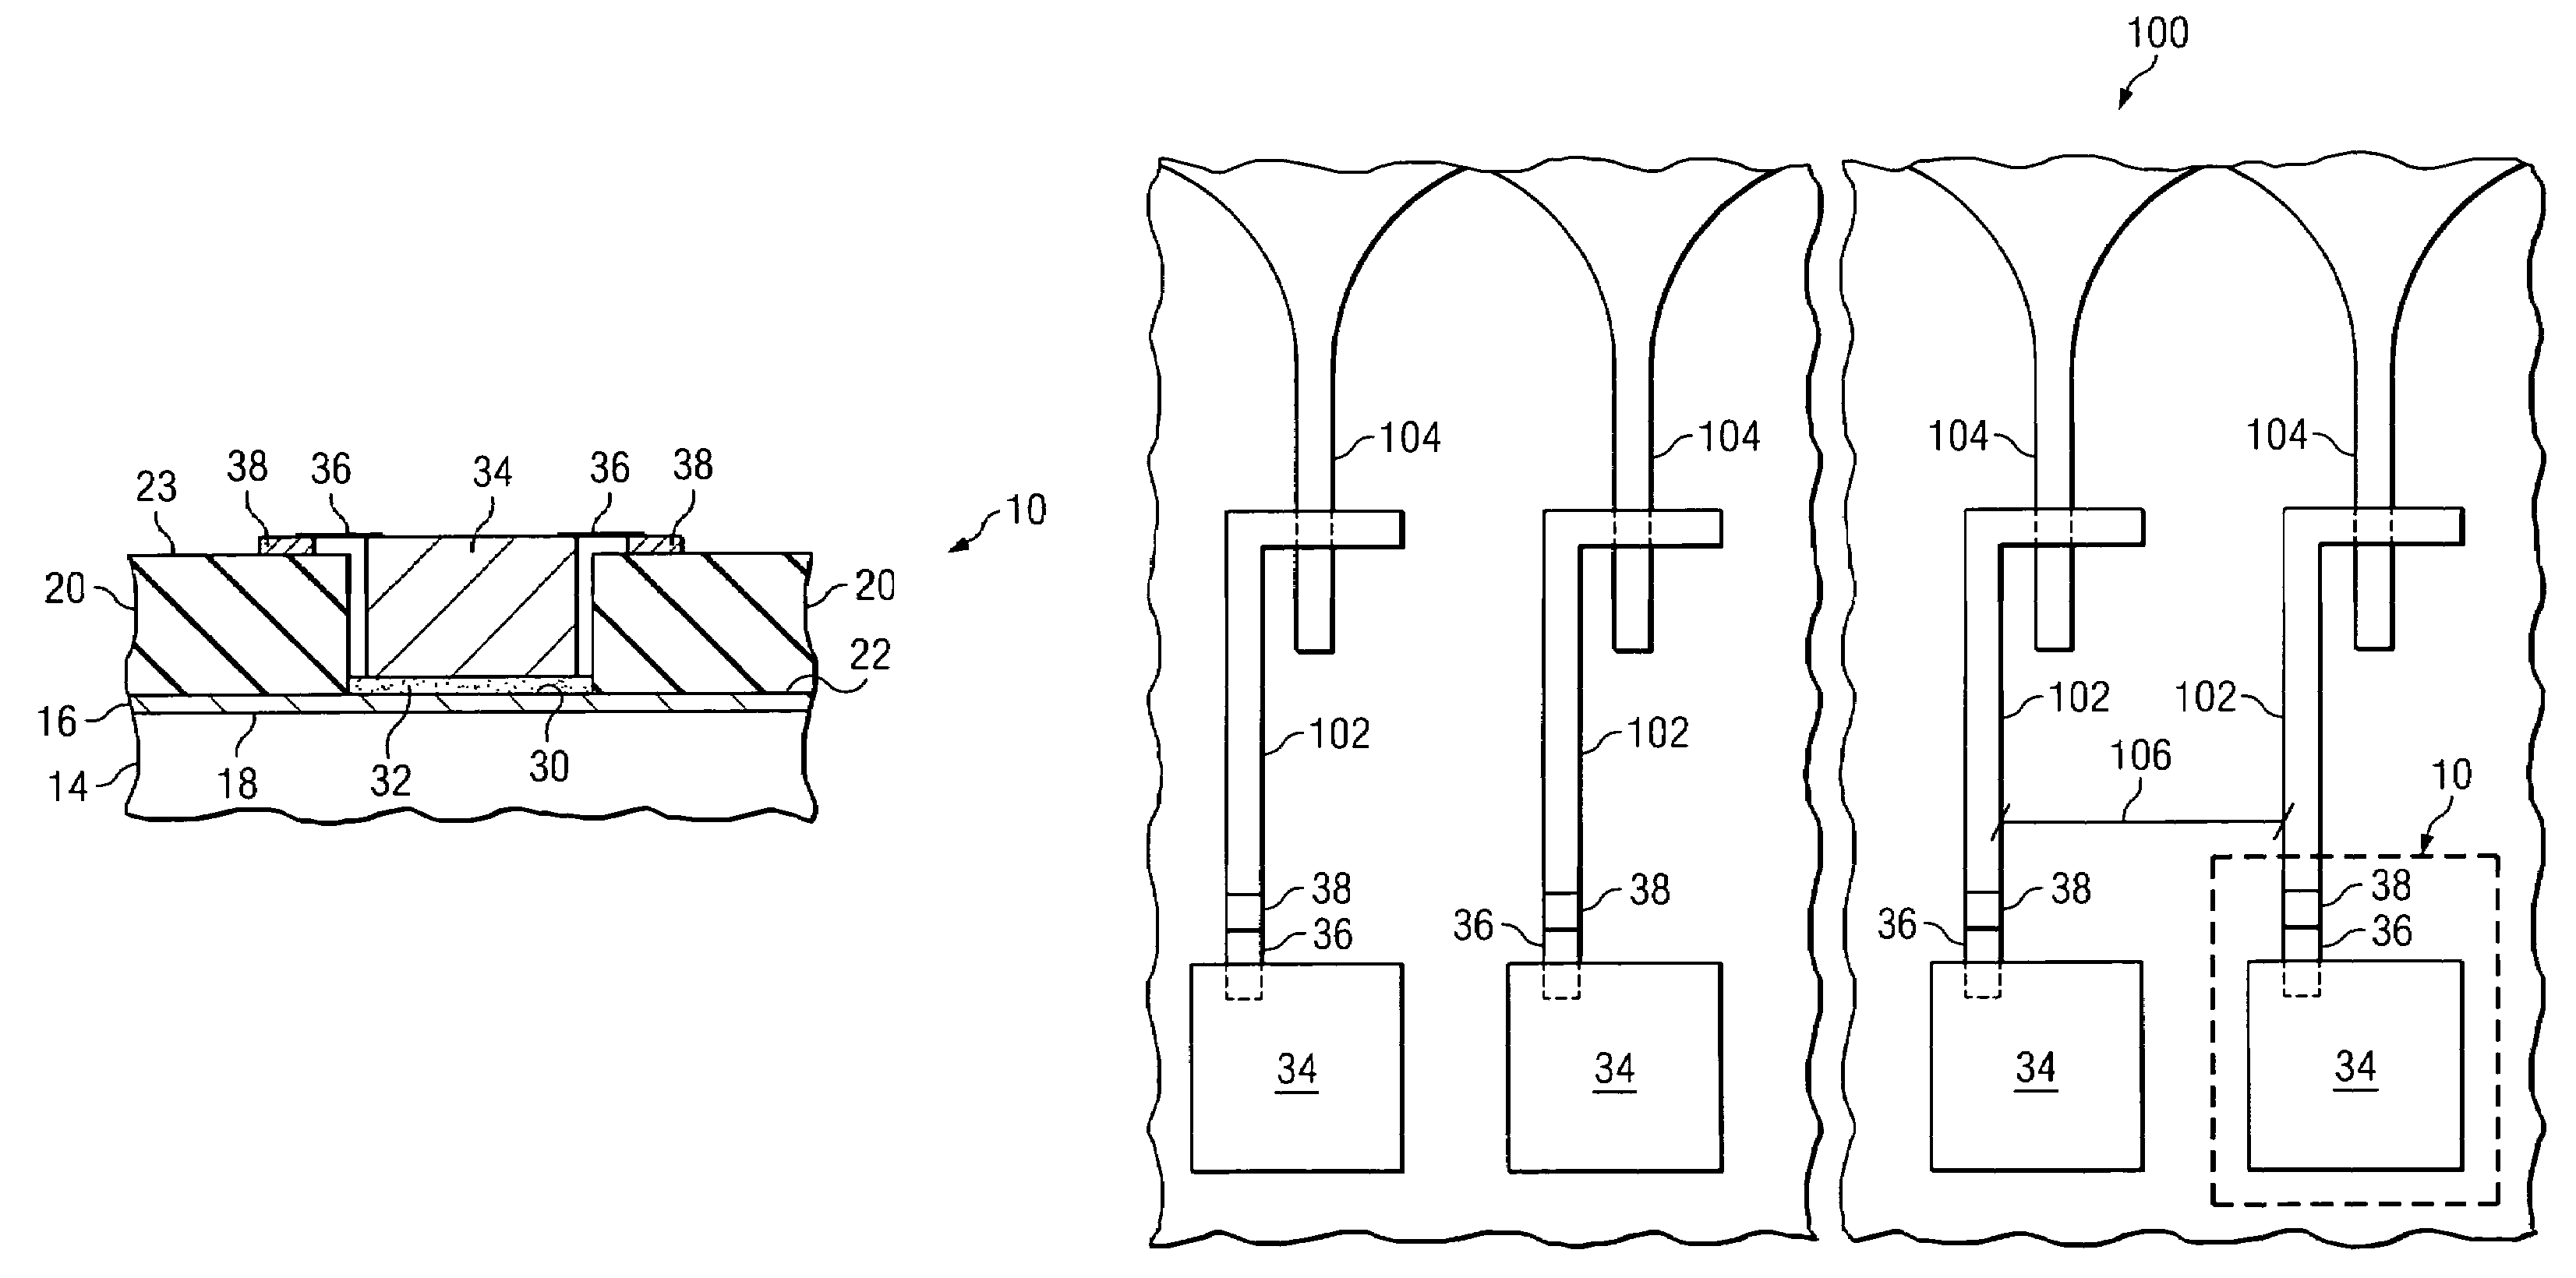 Reduced inductance interconnect for enhanced microwave and millimeter-wave systems